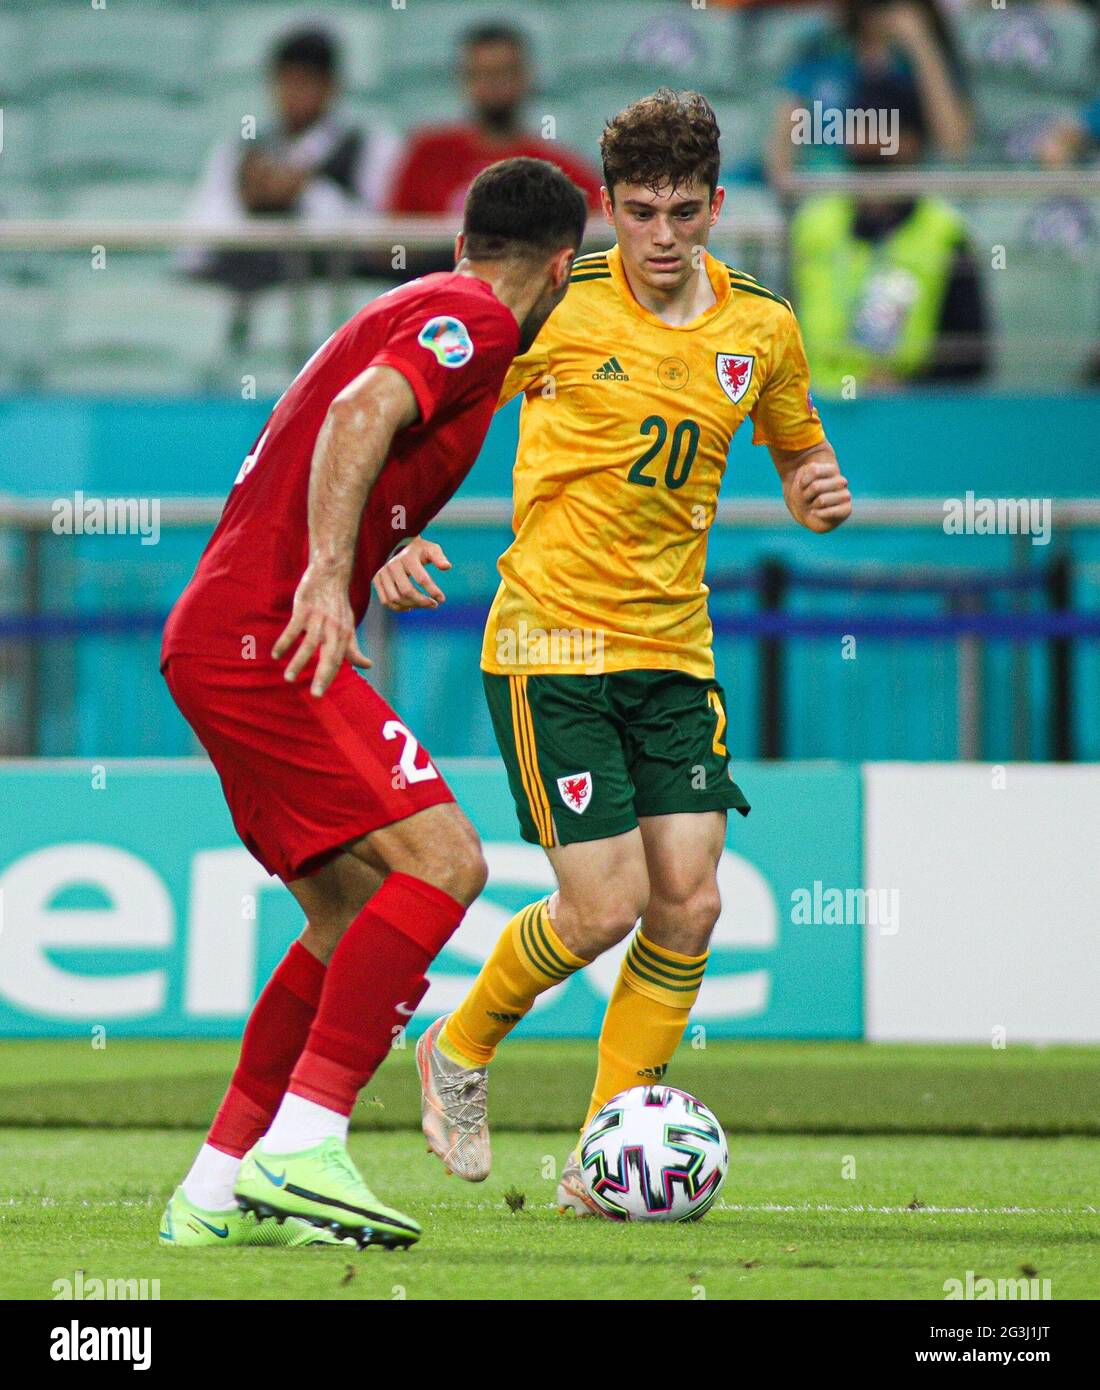 Daniel James of Wales during the UEFA Euro 2020 Group A match at the Baku Olympic Stadium in Azerbaijan. Picture date: Wednesday June 16, 2021. Stock Photo